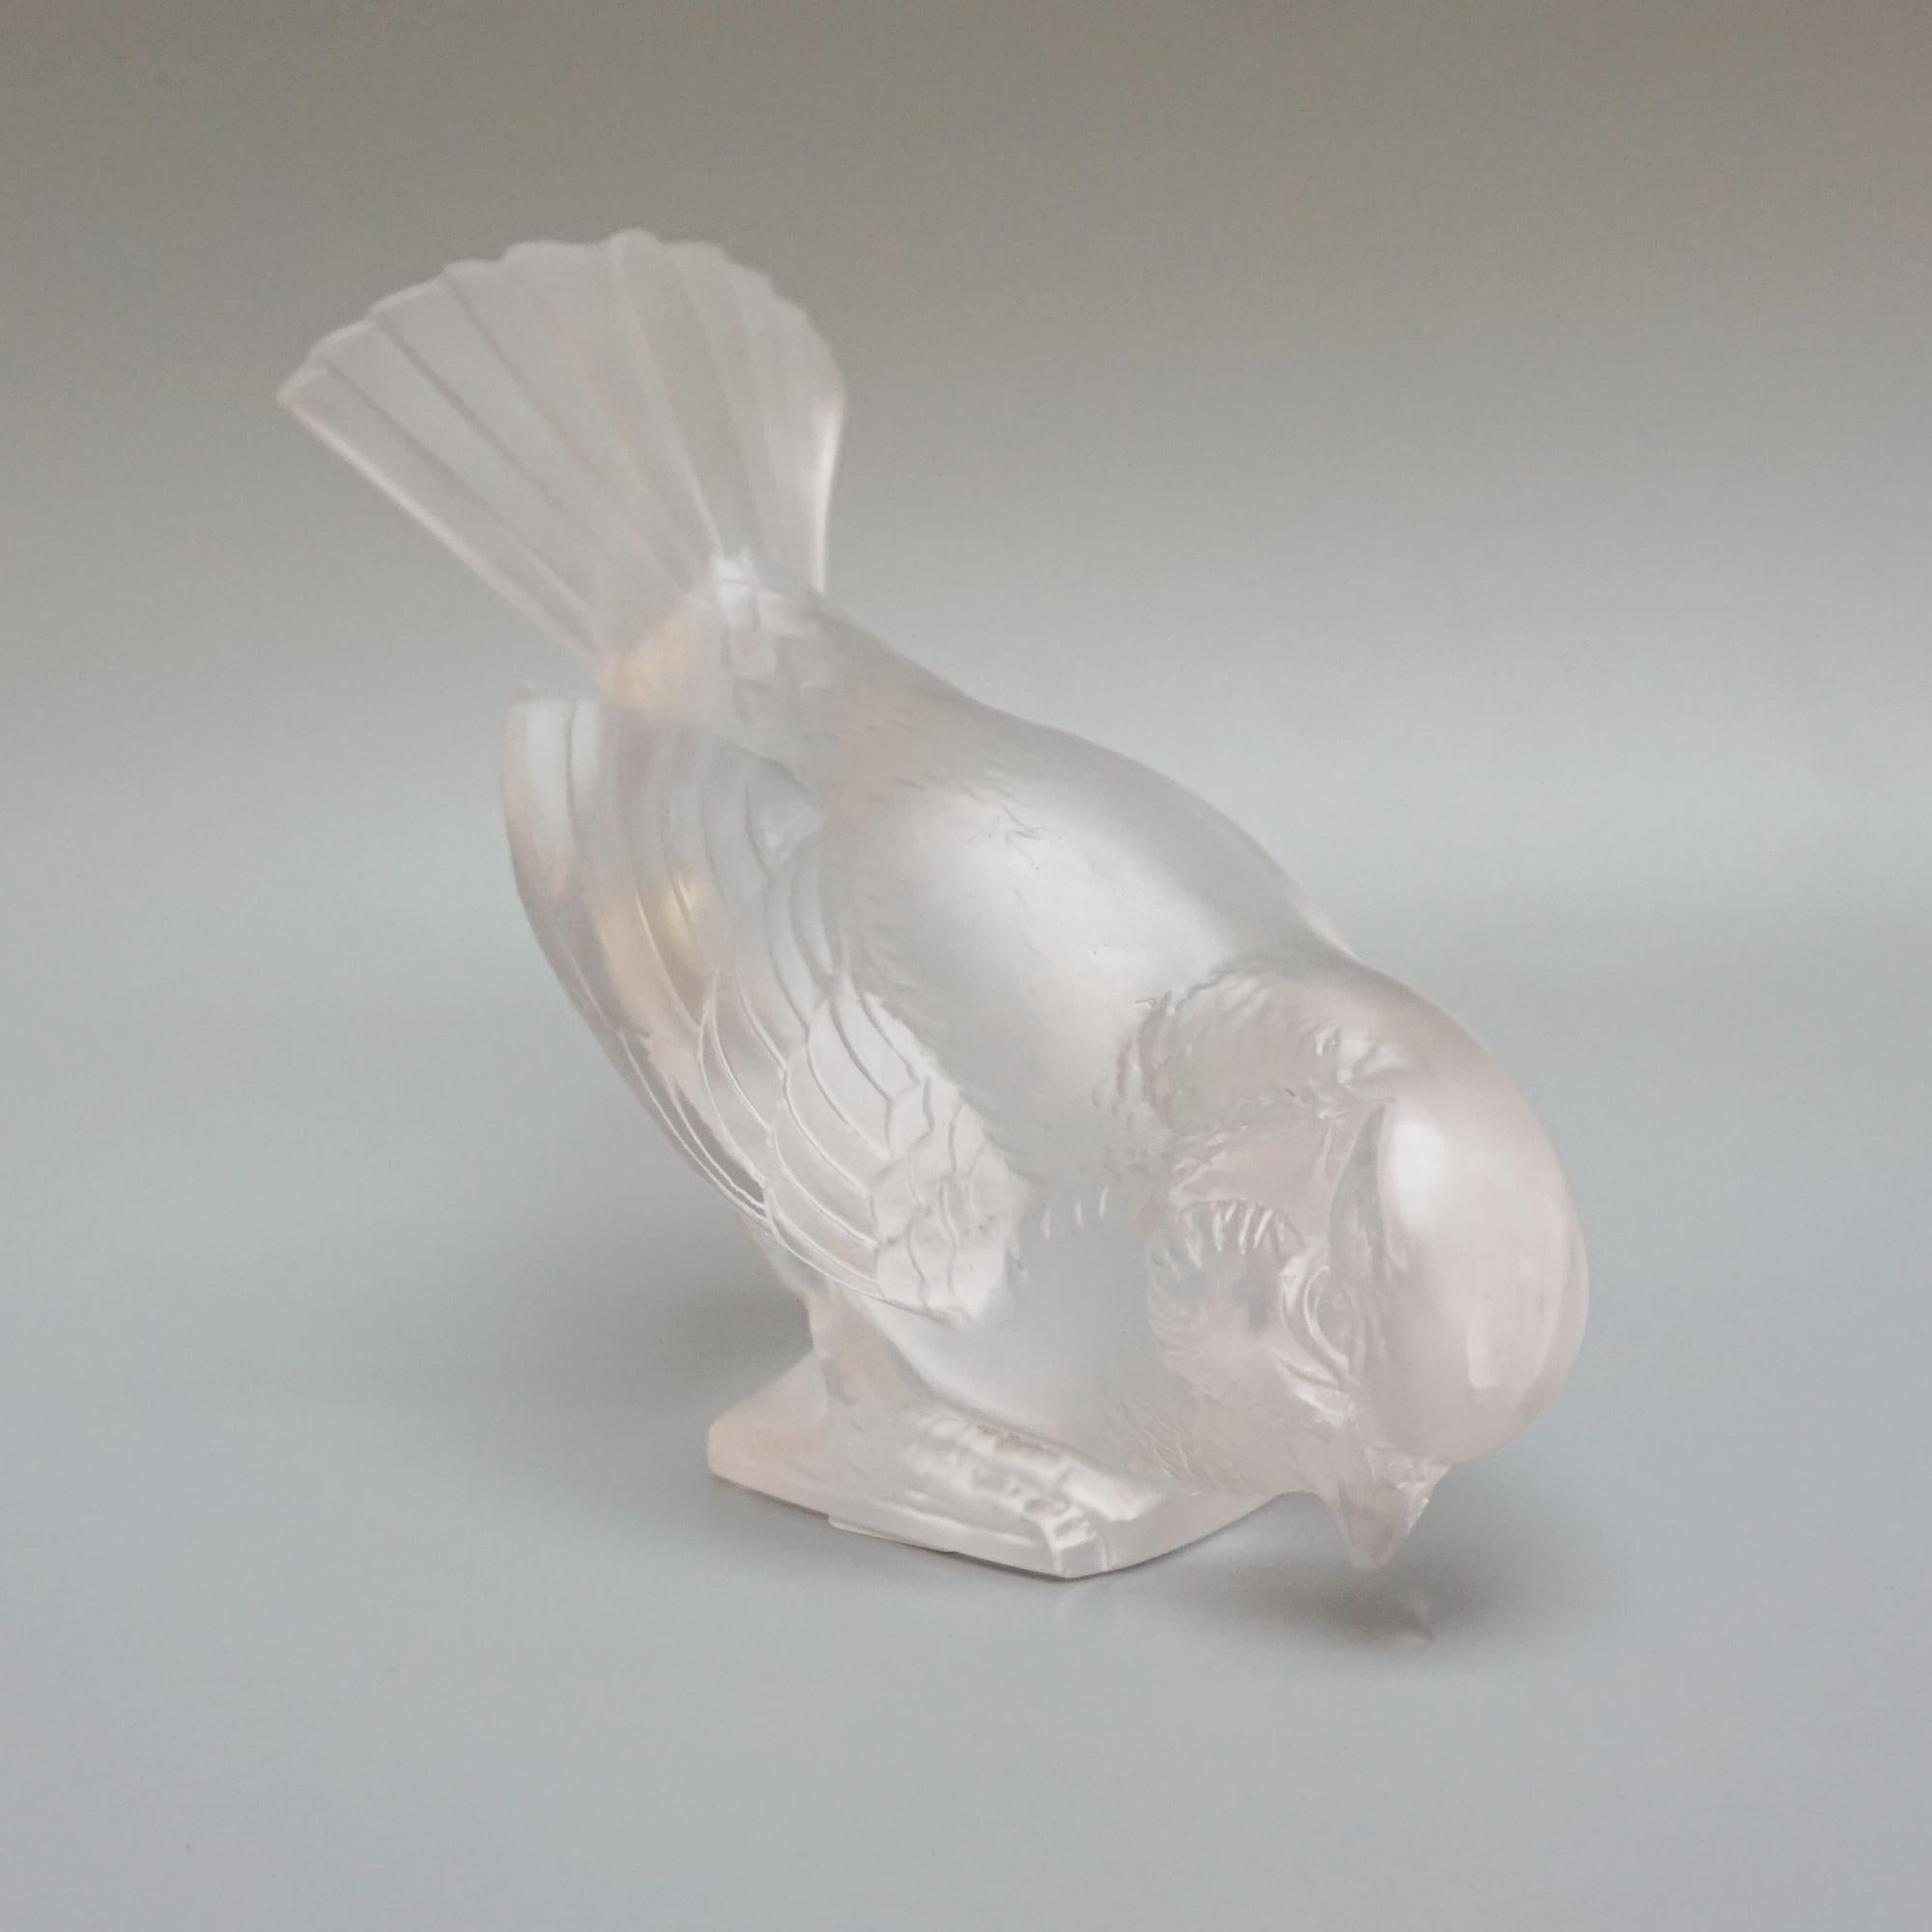 'Moineau Hardi' Art Deco Glass Paperweight by Rene Lalique  In Good Condition For Sale In Forest Row, East Sussex